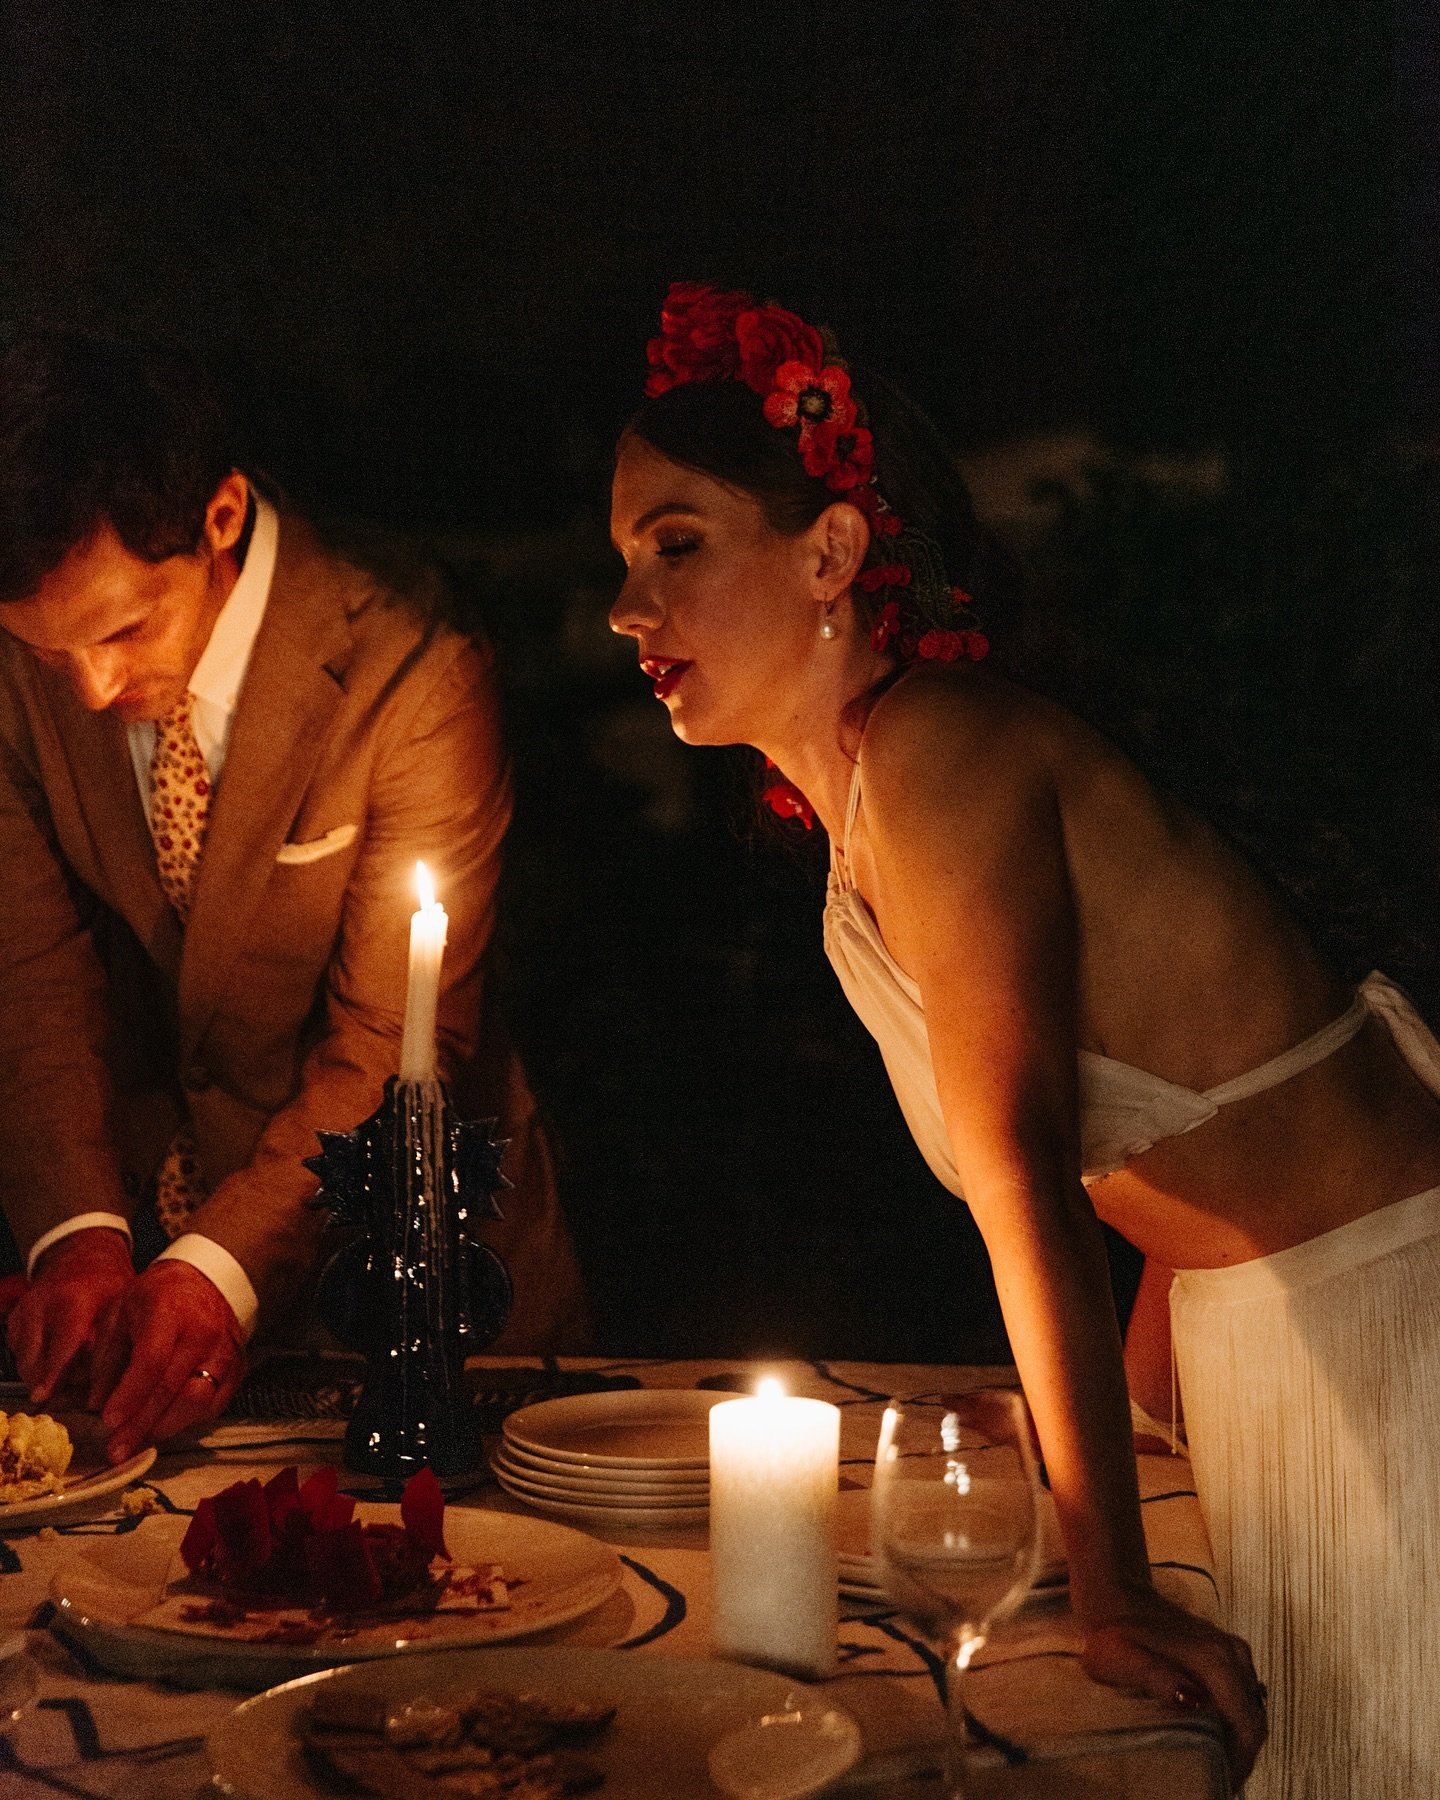 After dark at the dessert table. A favourite photo of C + M&rsquo;s magical Barcelona destination wedding.

the bride and groom are lit by warm natural candle light. 

#2025weddings #devonweddingphotographer #weddinginspiration #candledecor #naturall